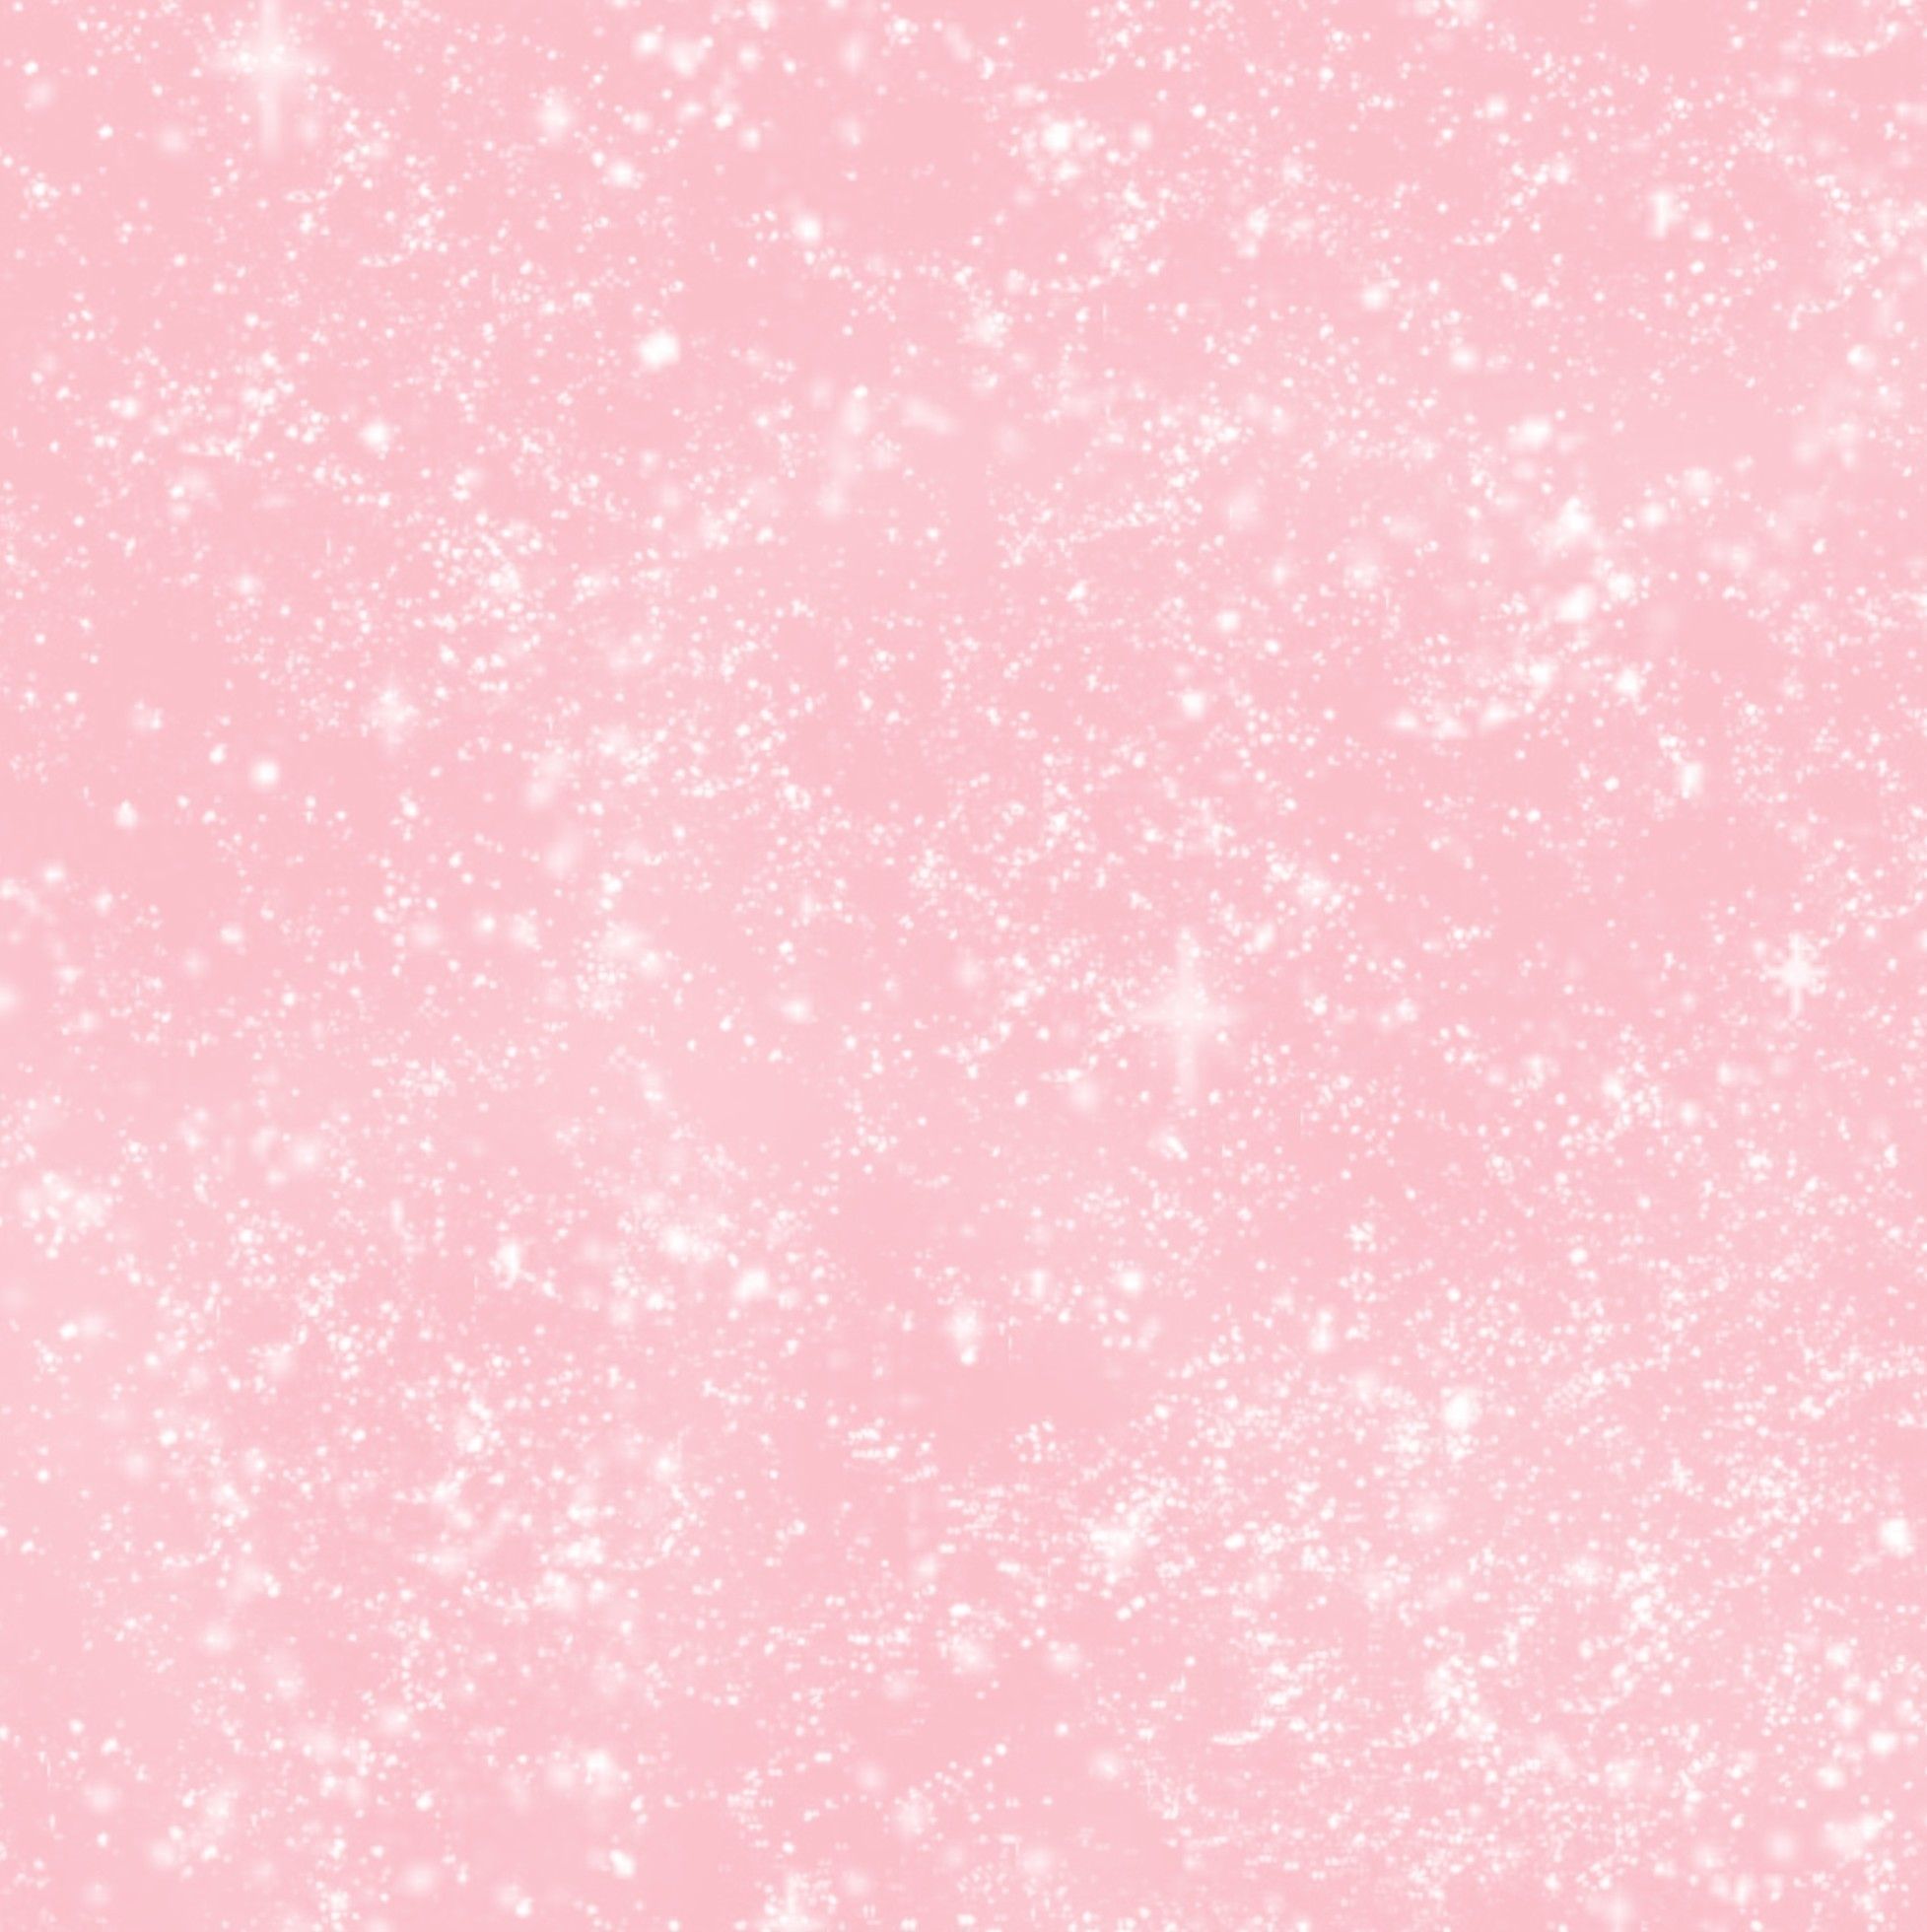 A pink background with stars - Light pink